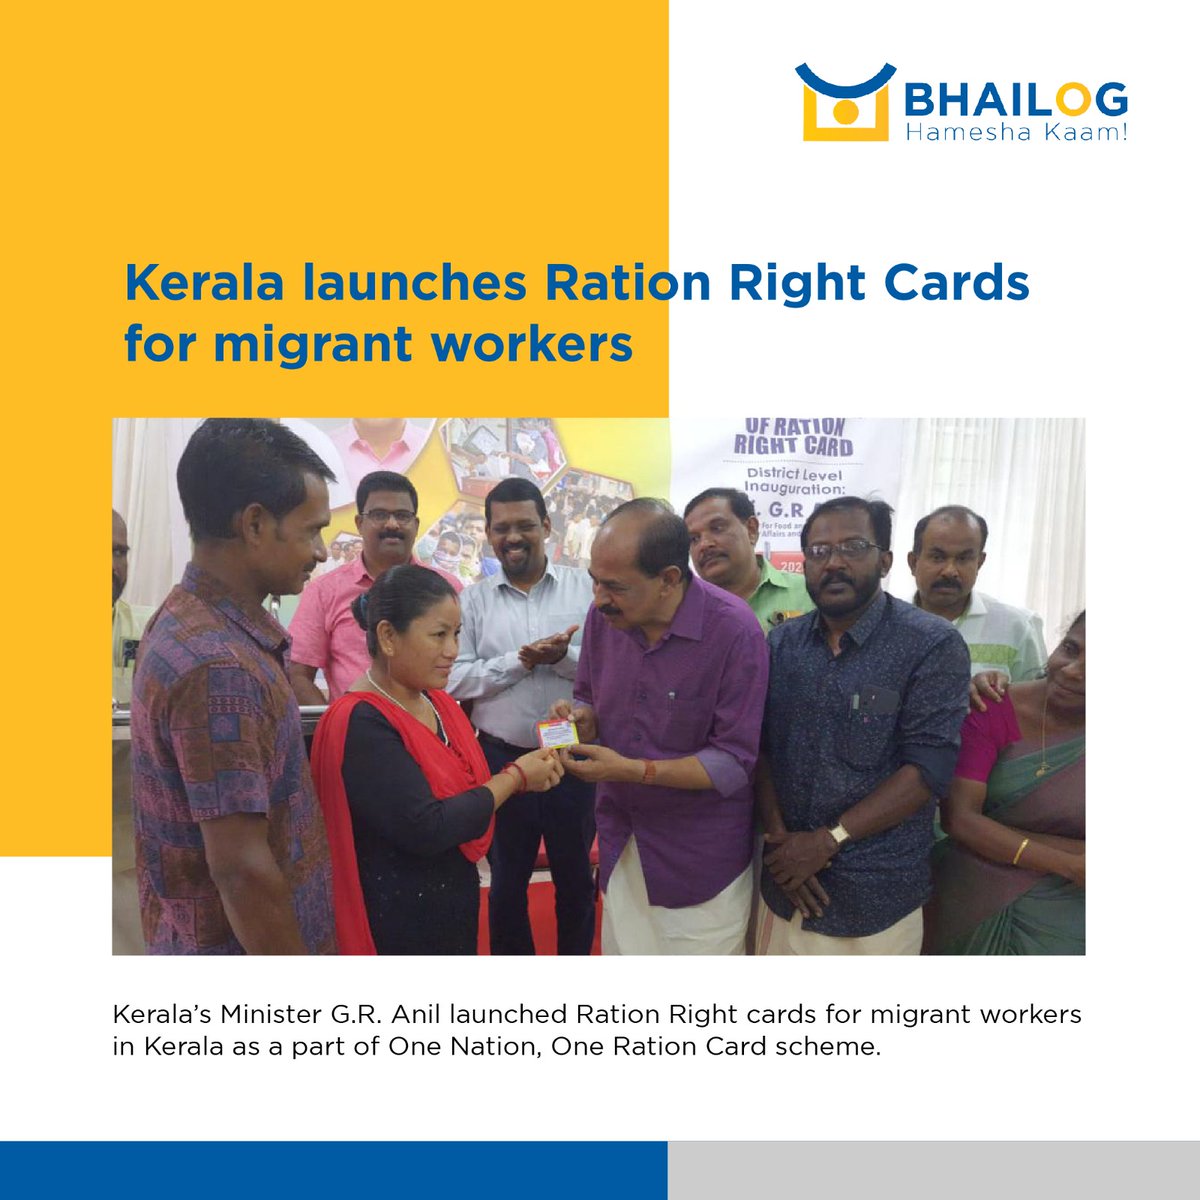 Kerala’s Minister G.R. Anil launched Ration Right cards for migrant workers in Kerala as a part of One Nation, One Ration Card scheme.
.
.
.
.
#OneNationOneRationCard #MigrantWorkers #RationRightCards #SocialWelfare #Empowerment #FoodSecurity #GovernmentInitiative #bhailogapp